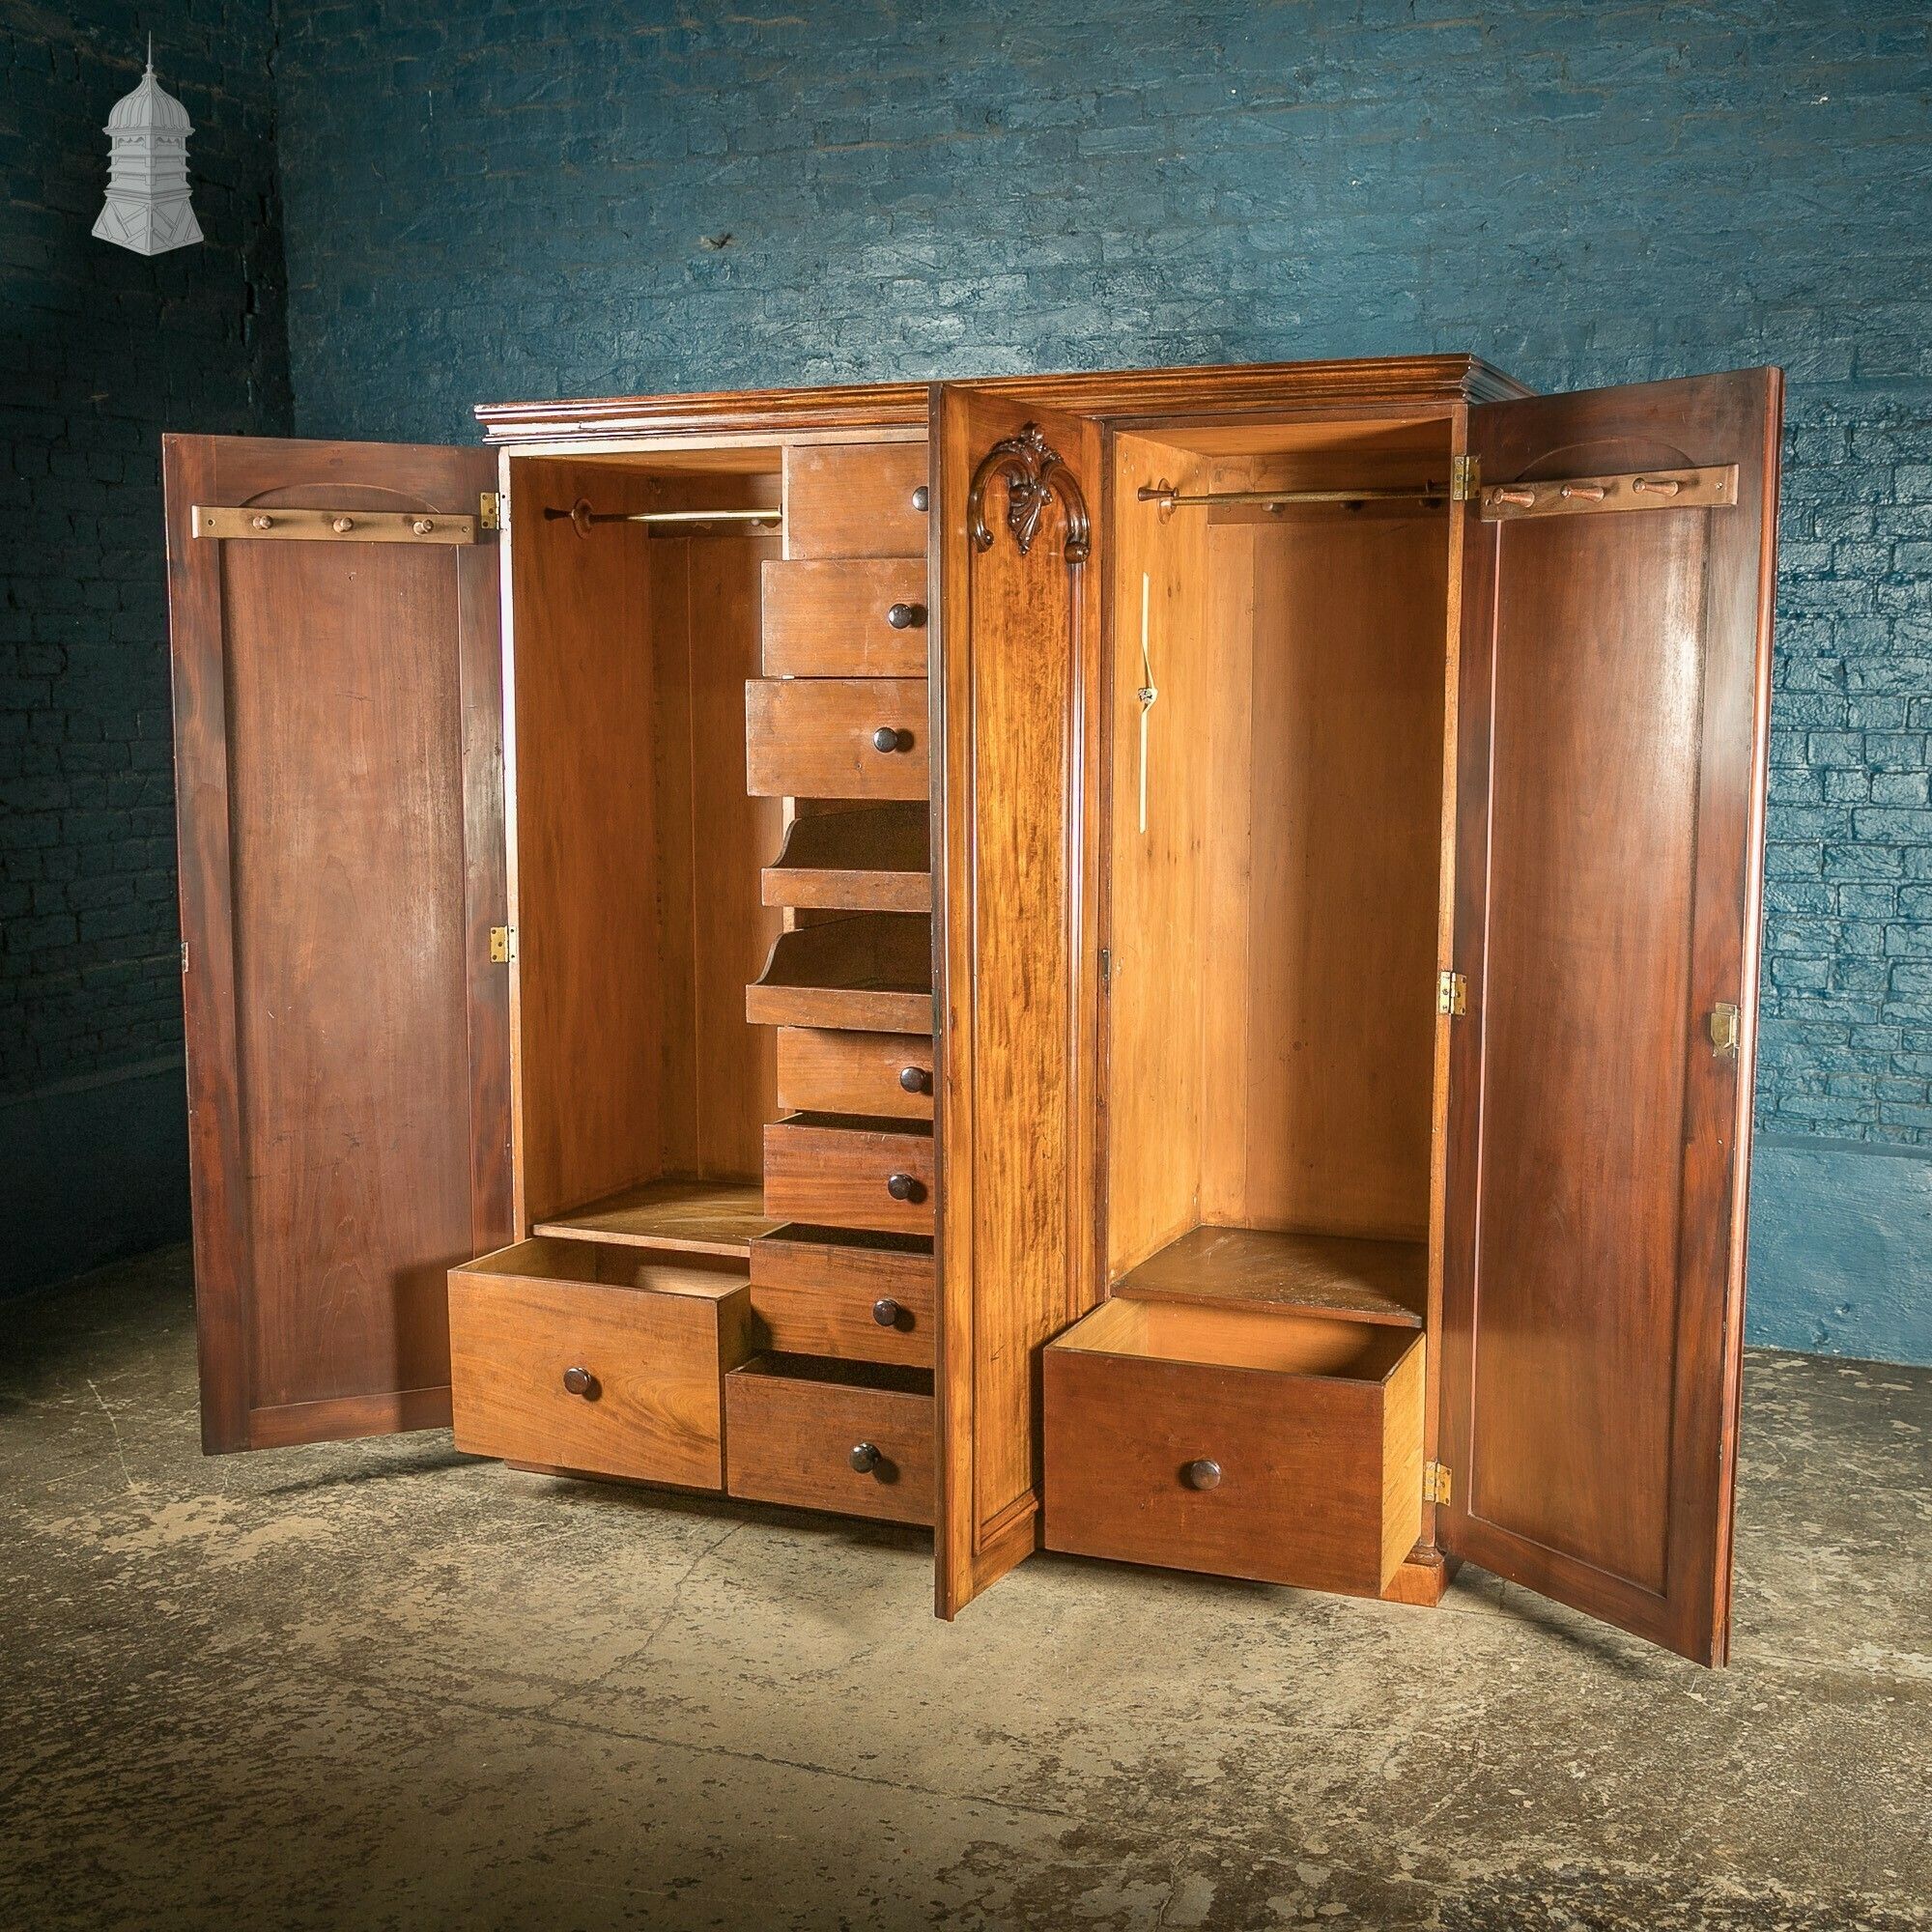 Mahogany Wardrobes From Vintage Experts | Vinterior Inside Old Fashioned Wardrobes (View 6 of 15)